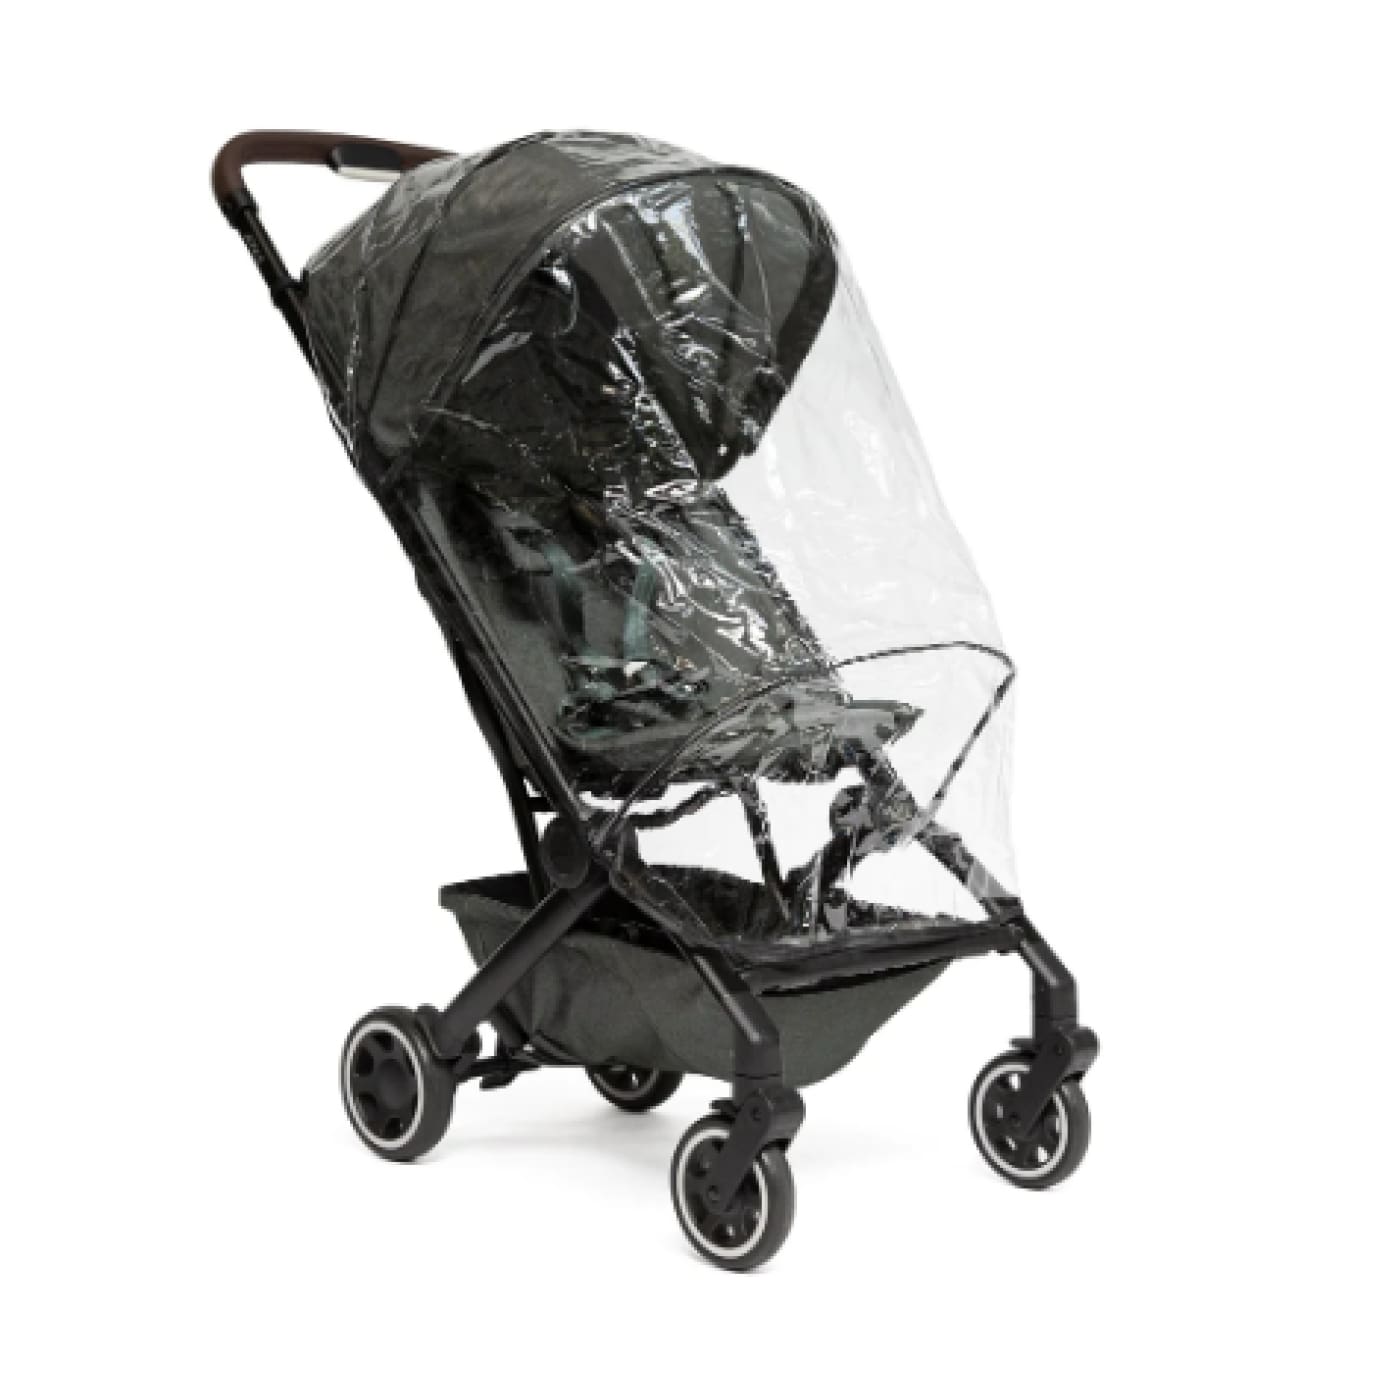 Joolz AER/AER+ Rain Cover - PRAMS & STROLLERS - SUN COVERS/WEATHER SHIELDS